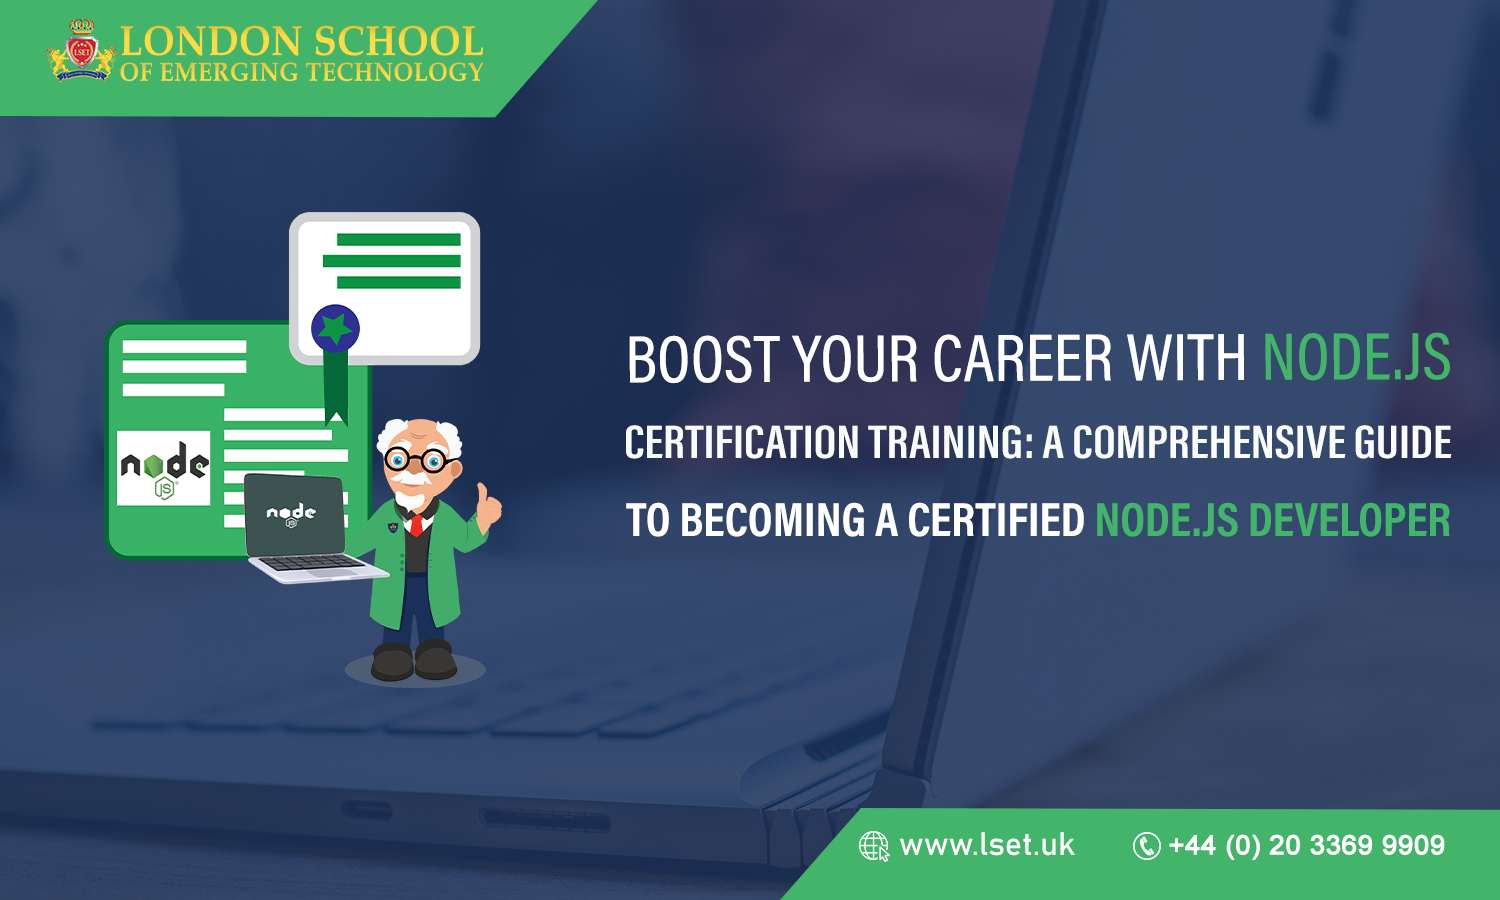 Boost Your Career with Node.js Certification Training A Comprehensive Guide to Becoming a Certified Node.js Developer